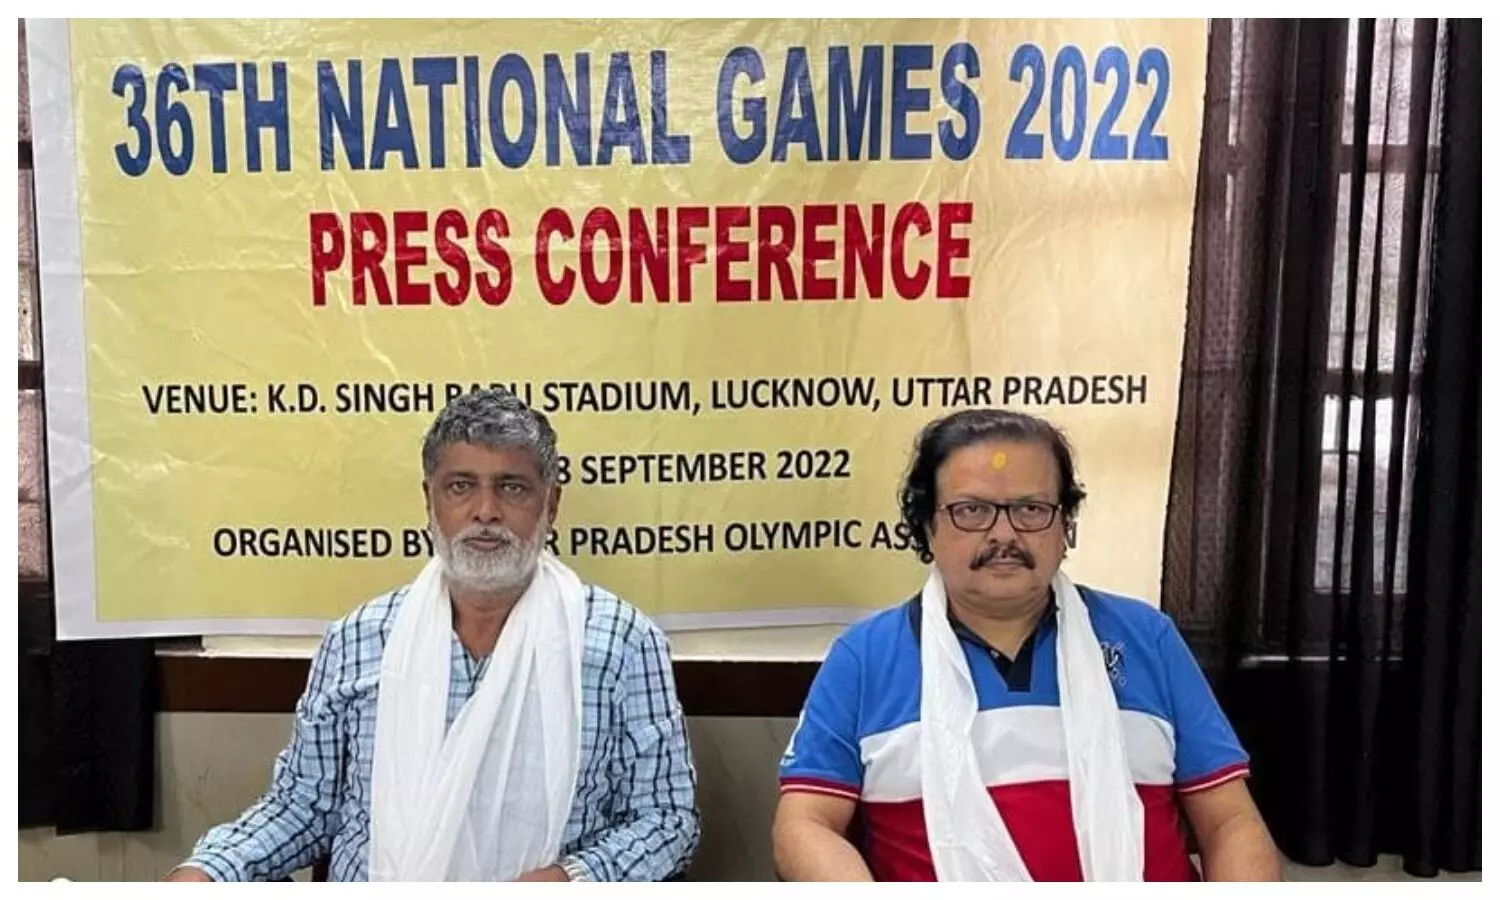 36th National Games 2022